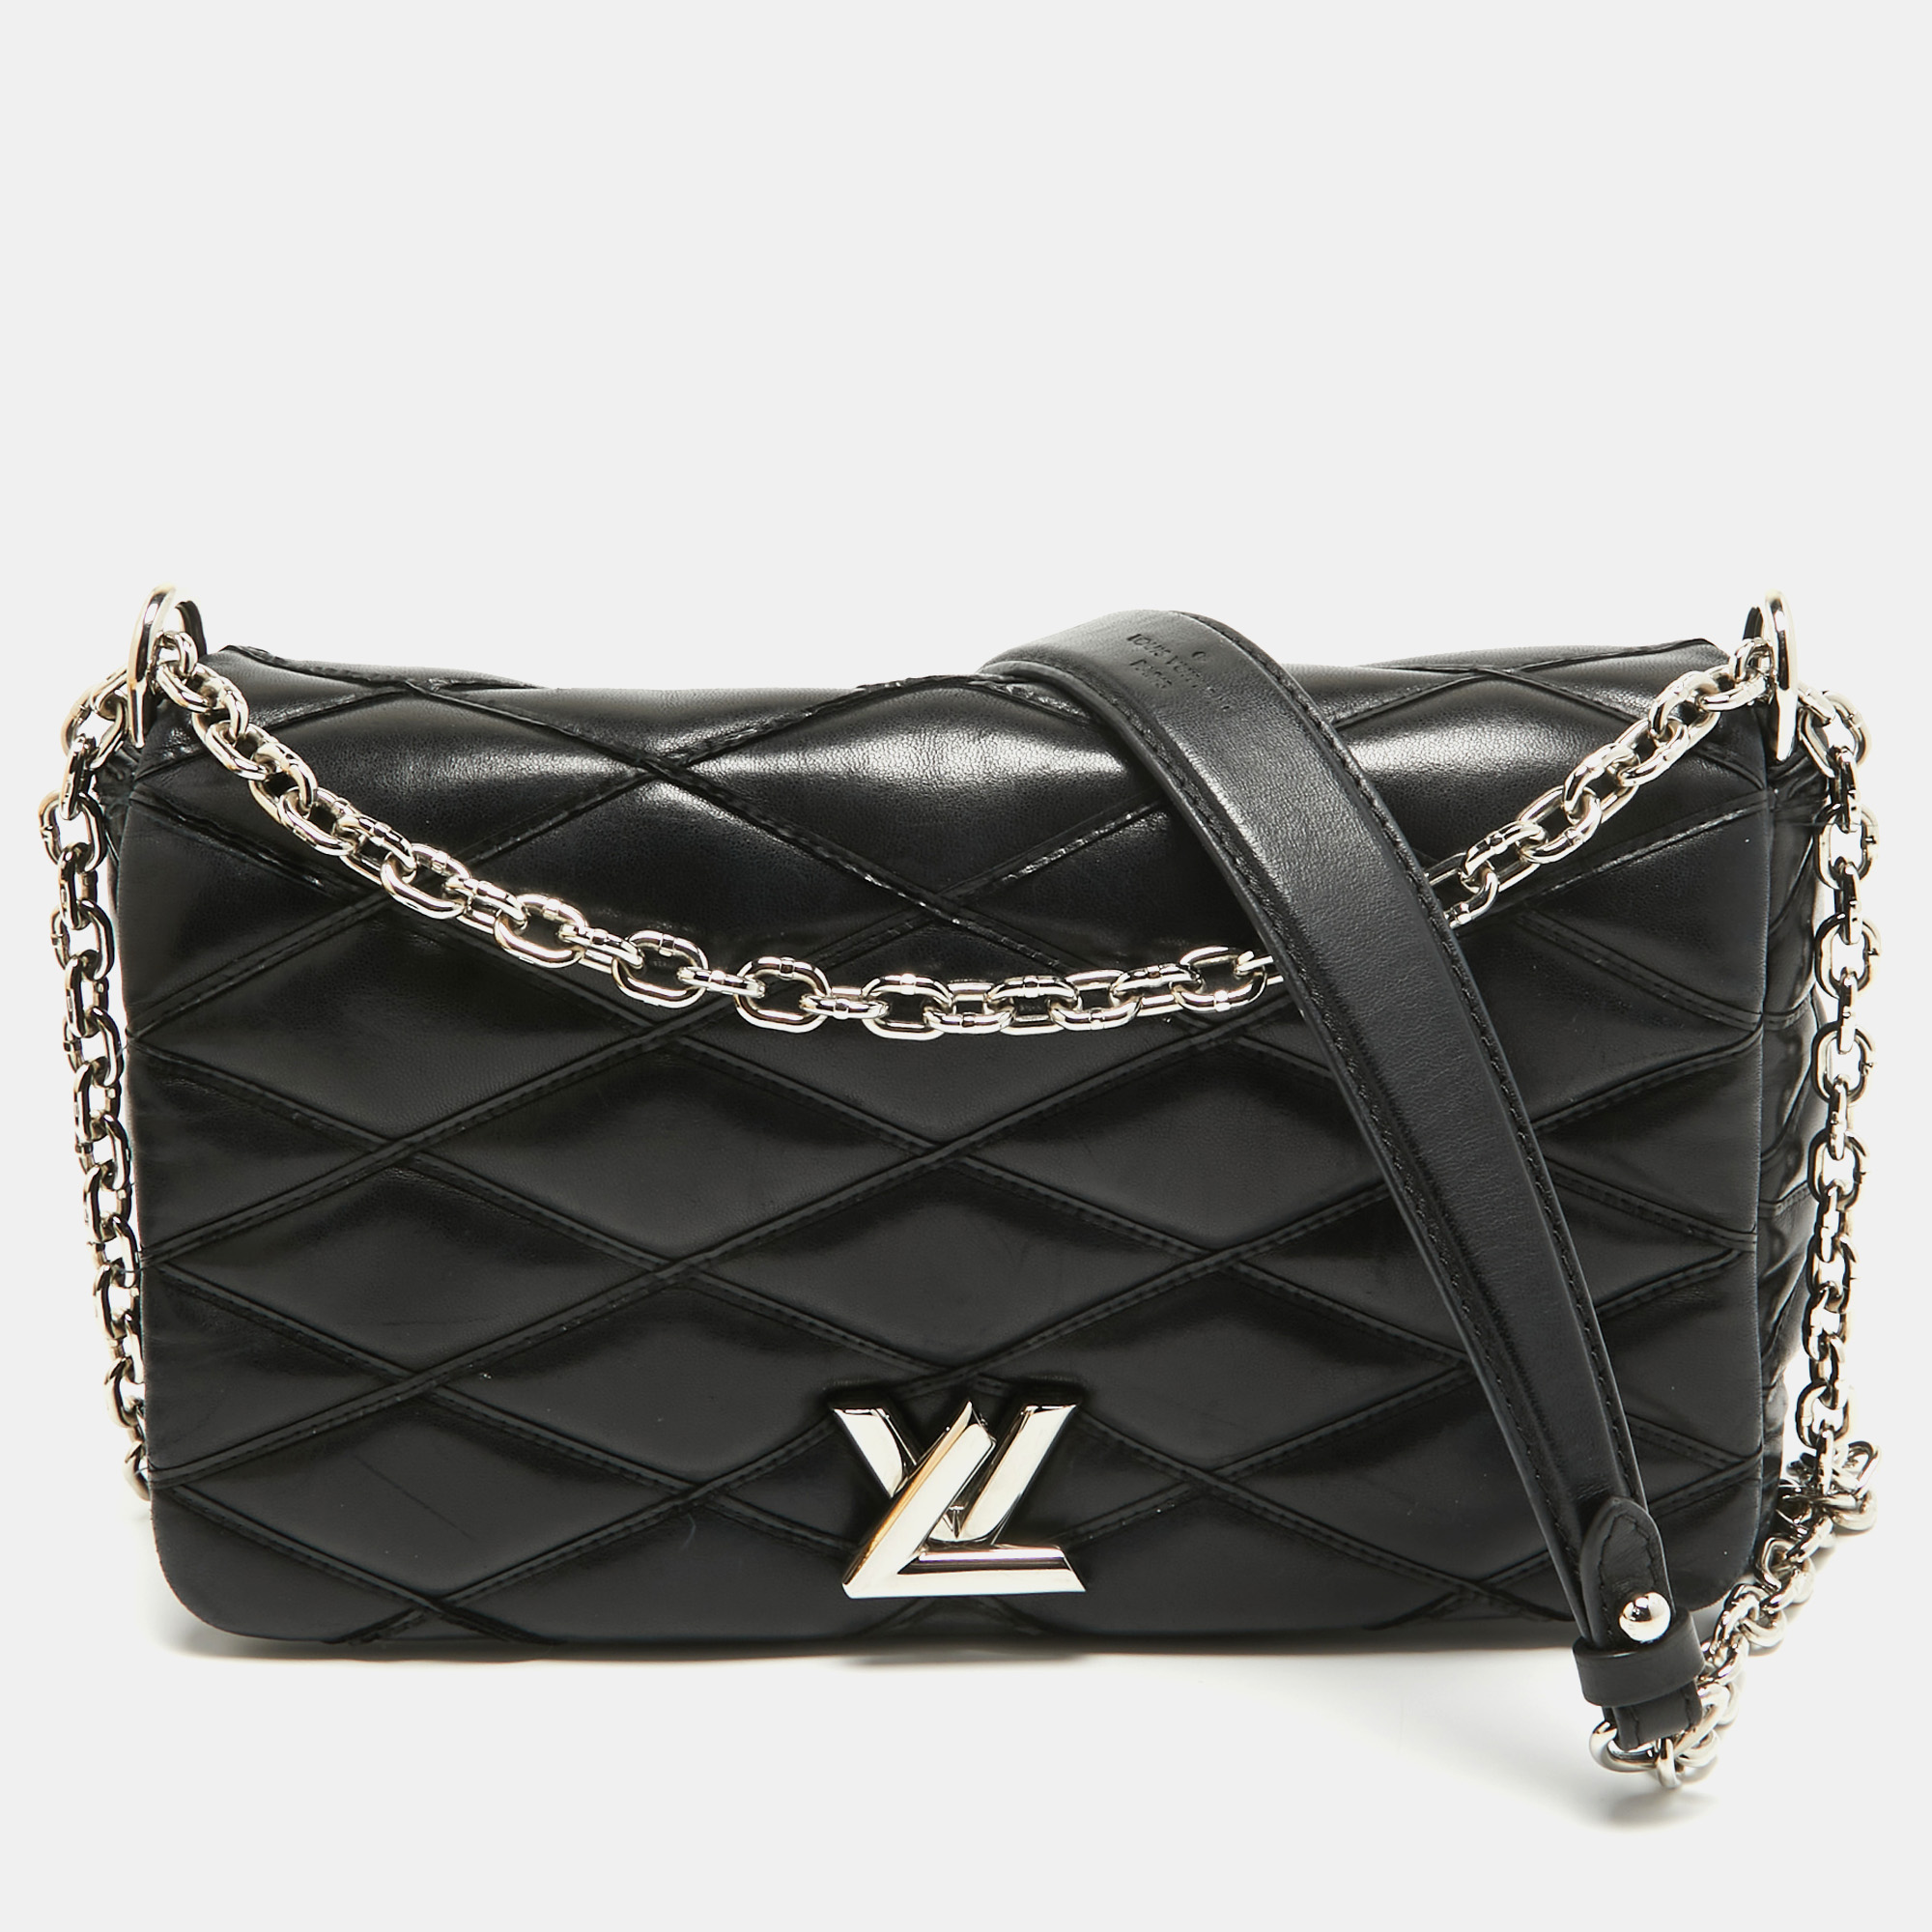 Pre-owned Louis Vuitton Black Quilted Leather Go-14 Malletage Mm Bag